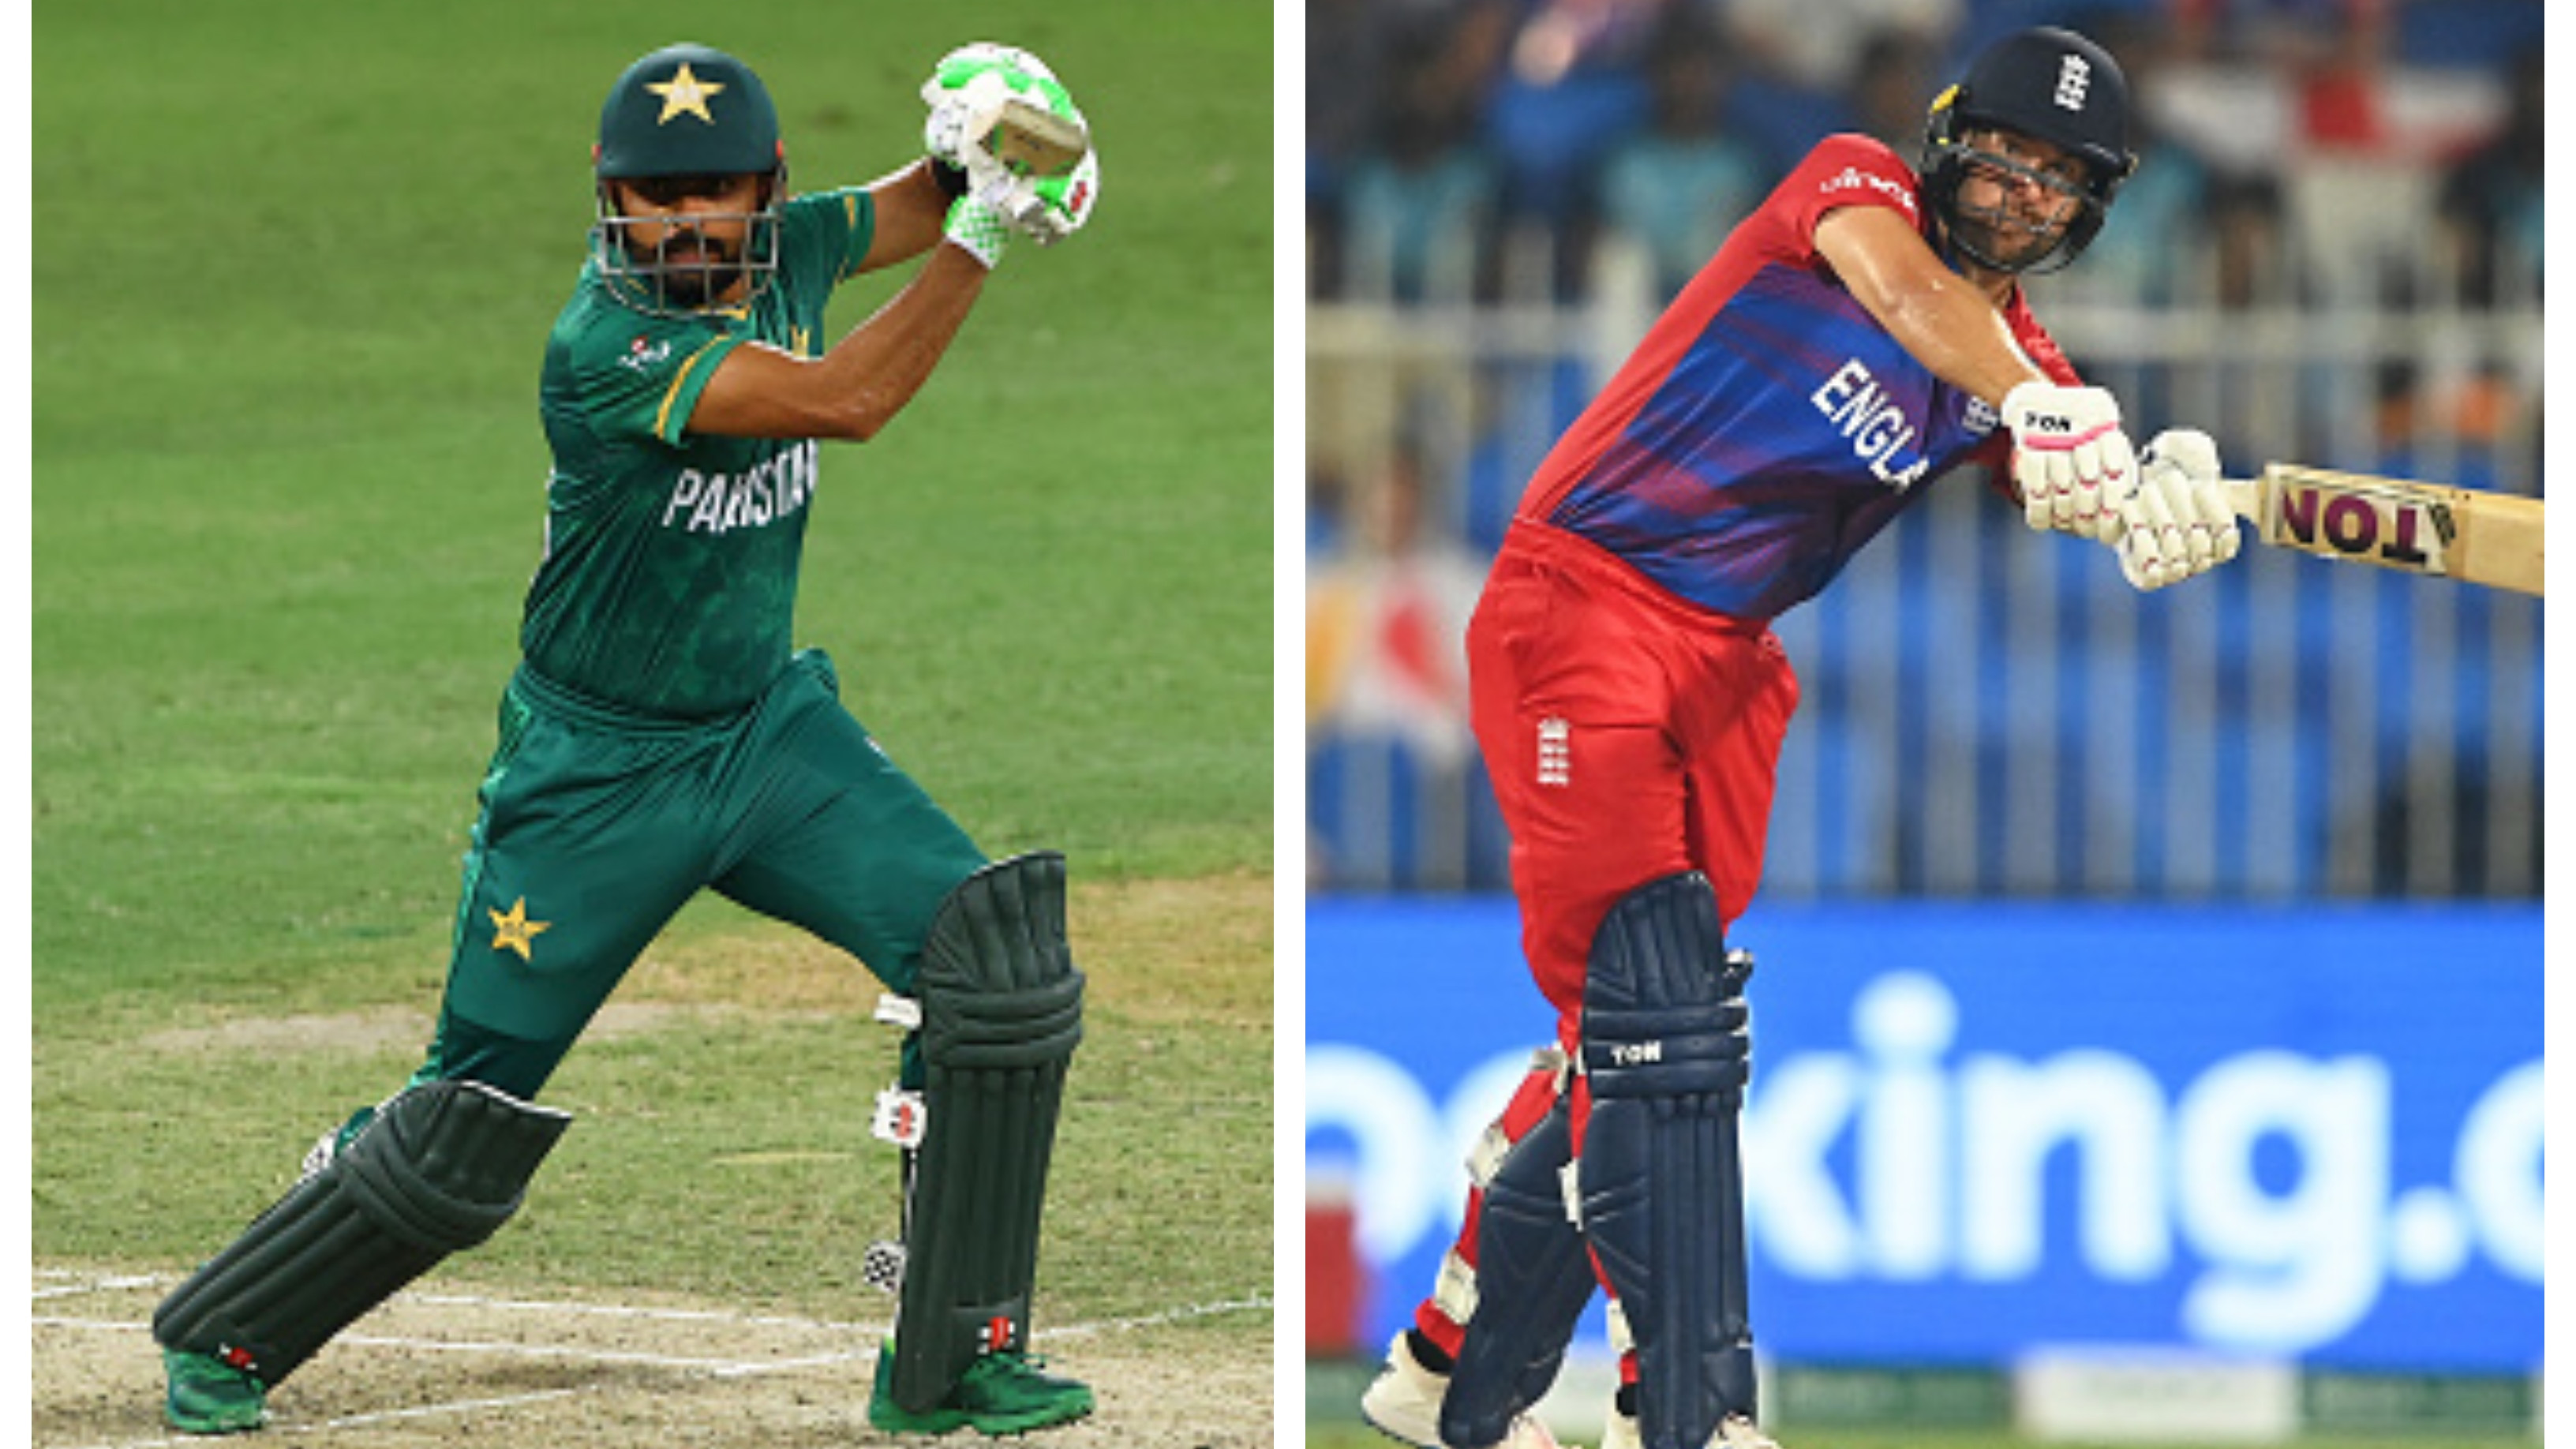 T20 World Cup 2021: Babar Azam pips Dawid Malan to reclaim top spot in ICC T20I batting rankings